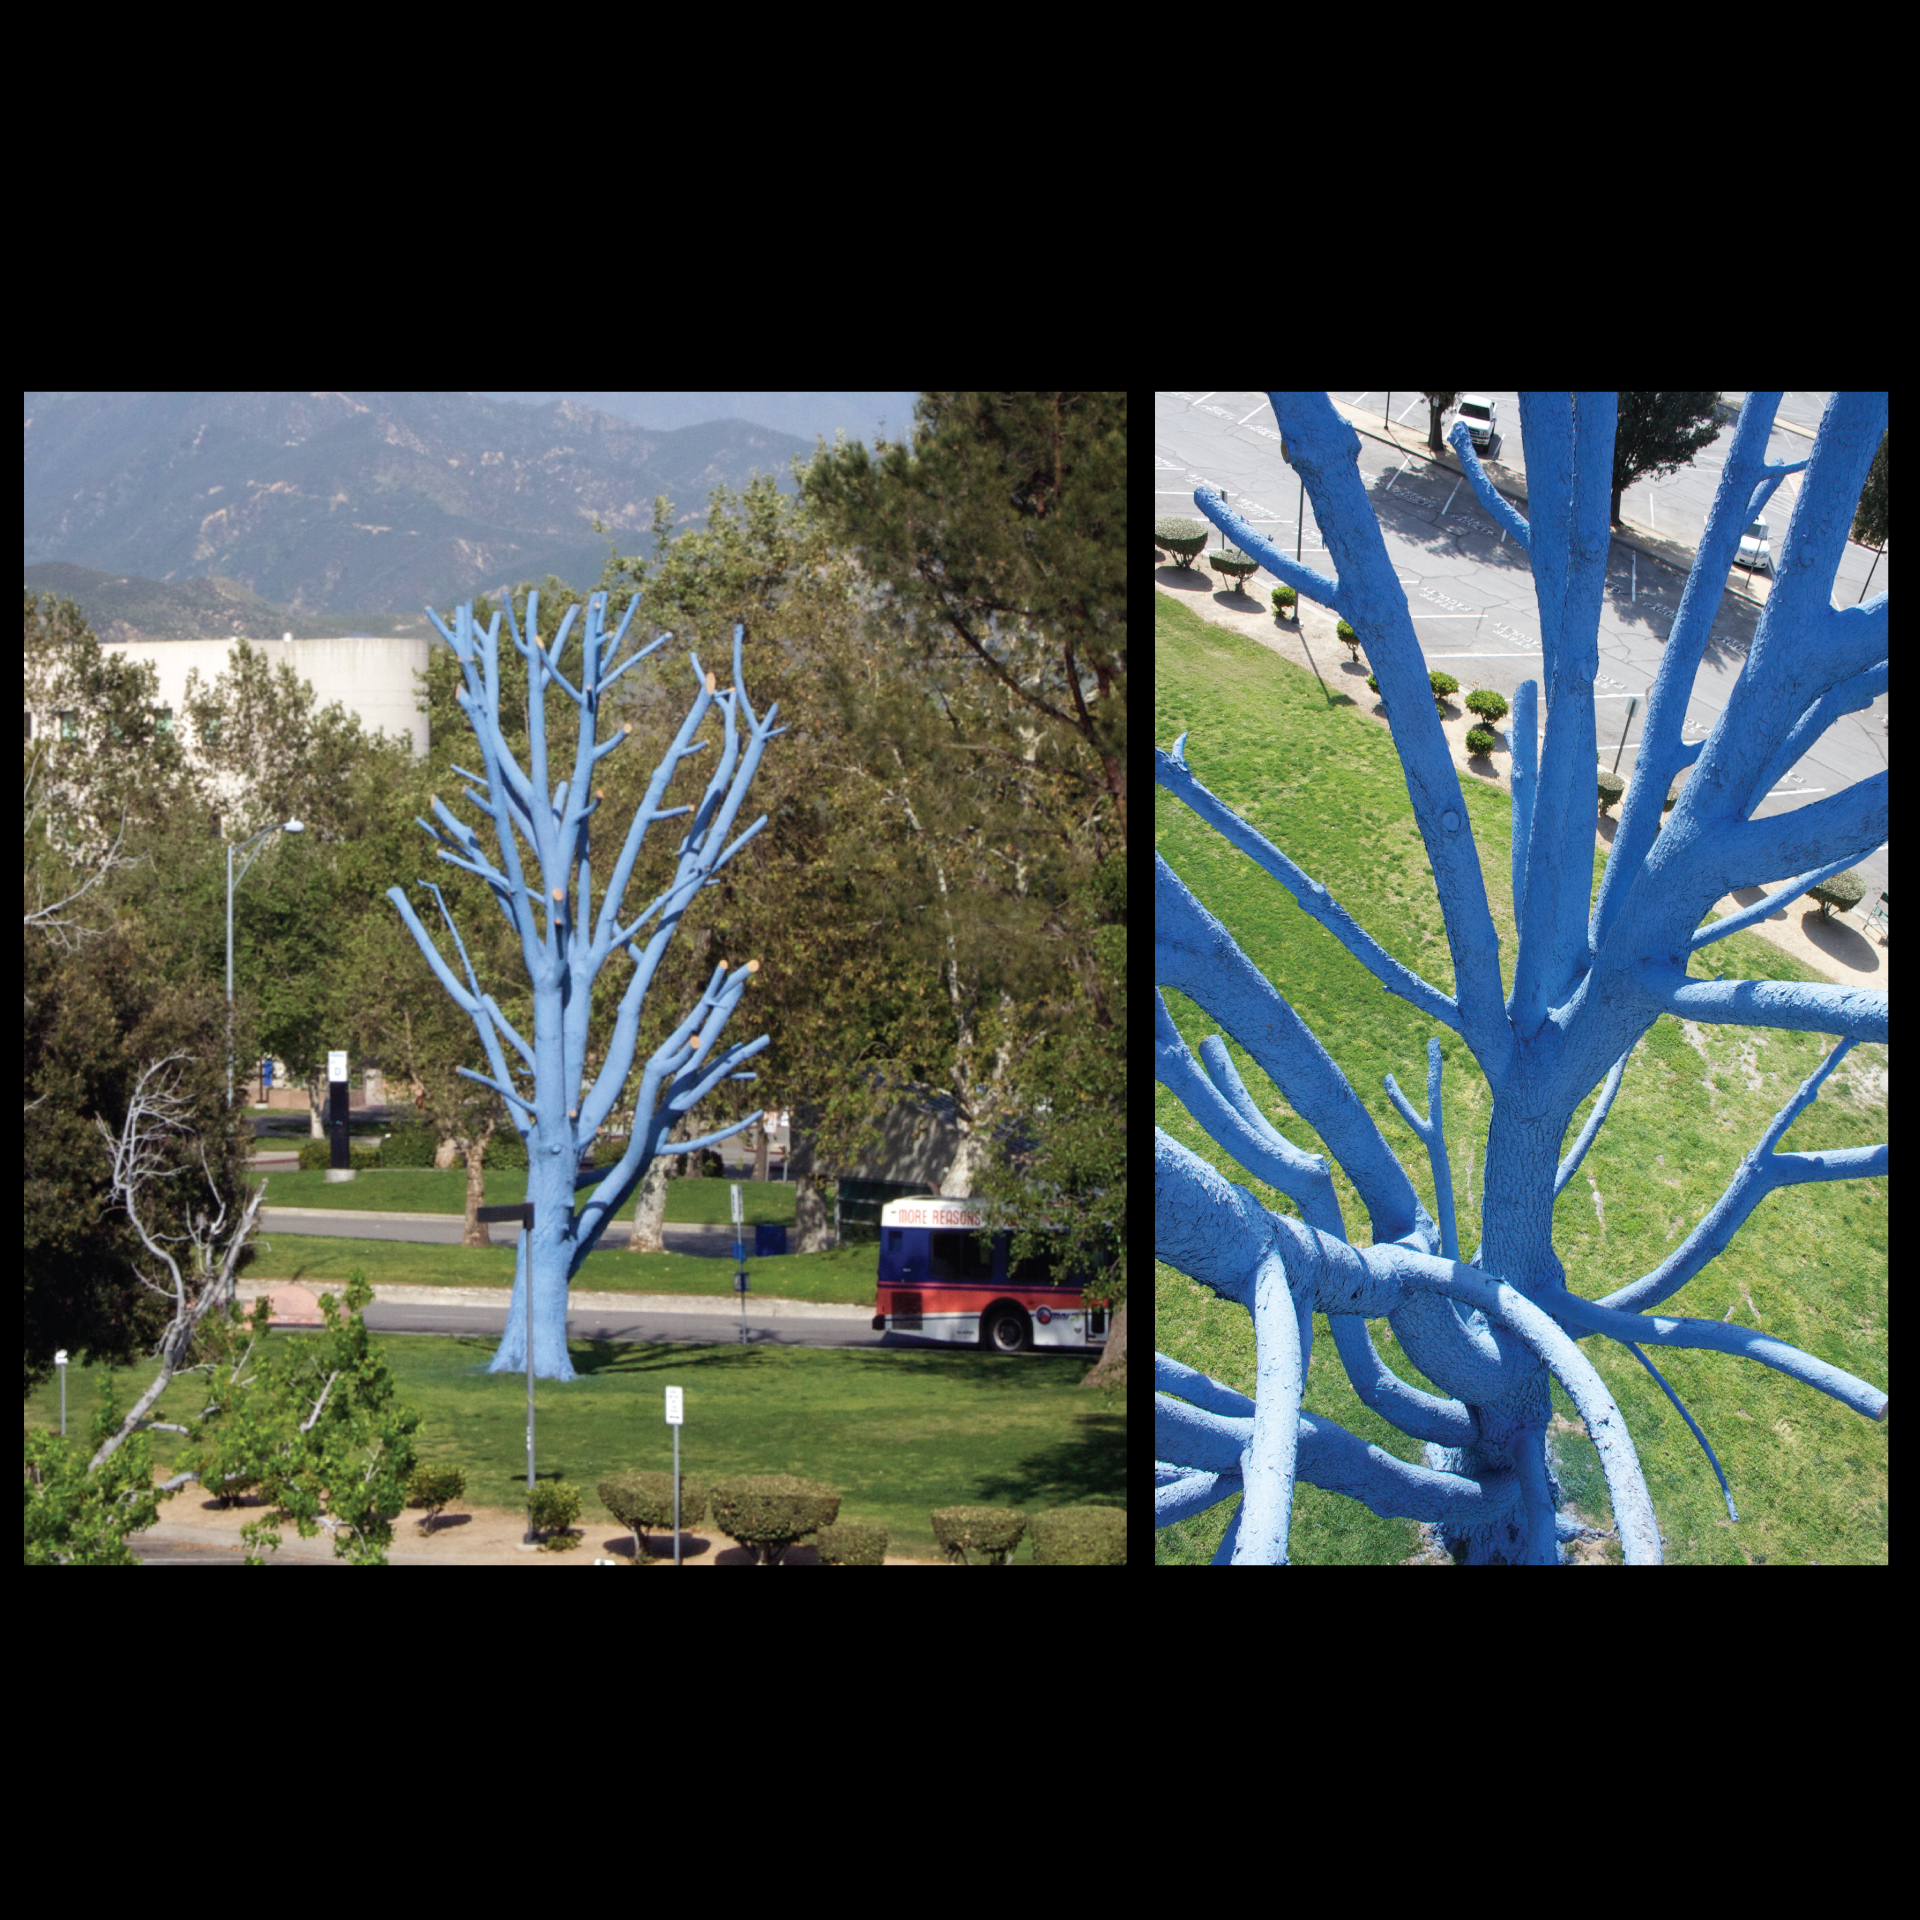 The Blue Tree Project